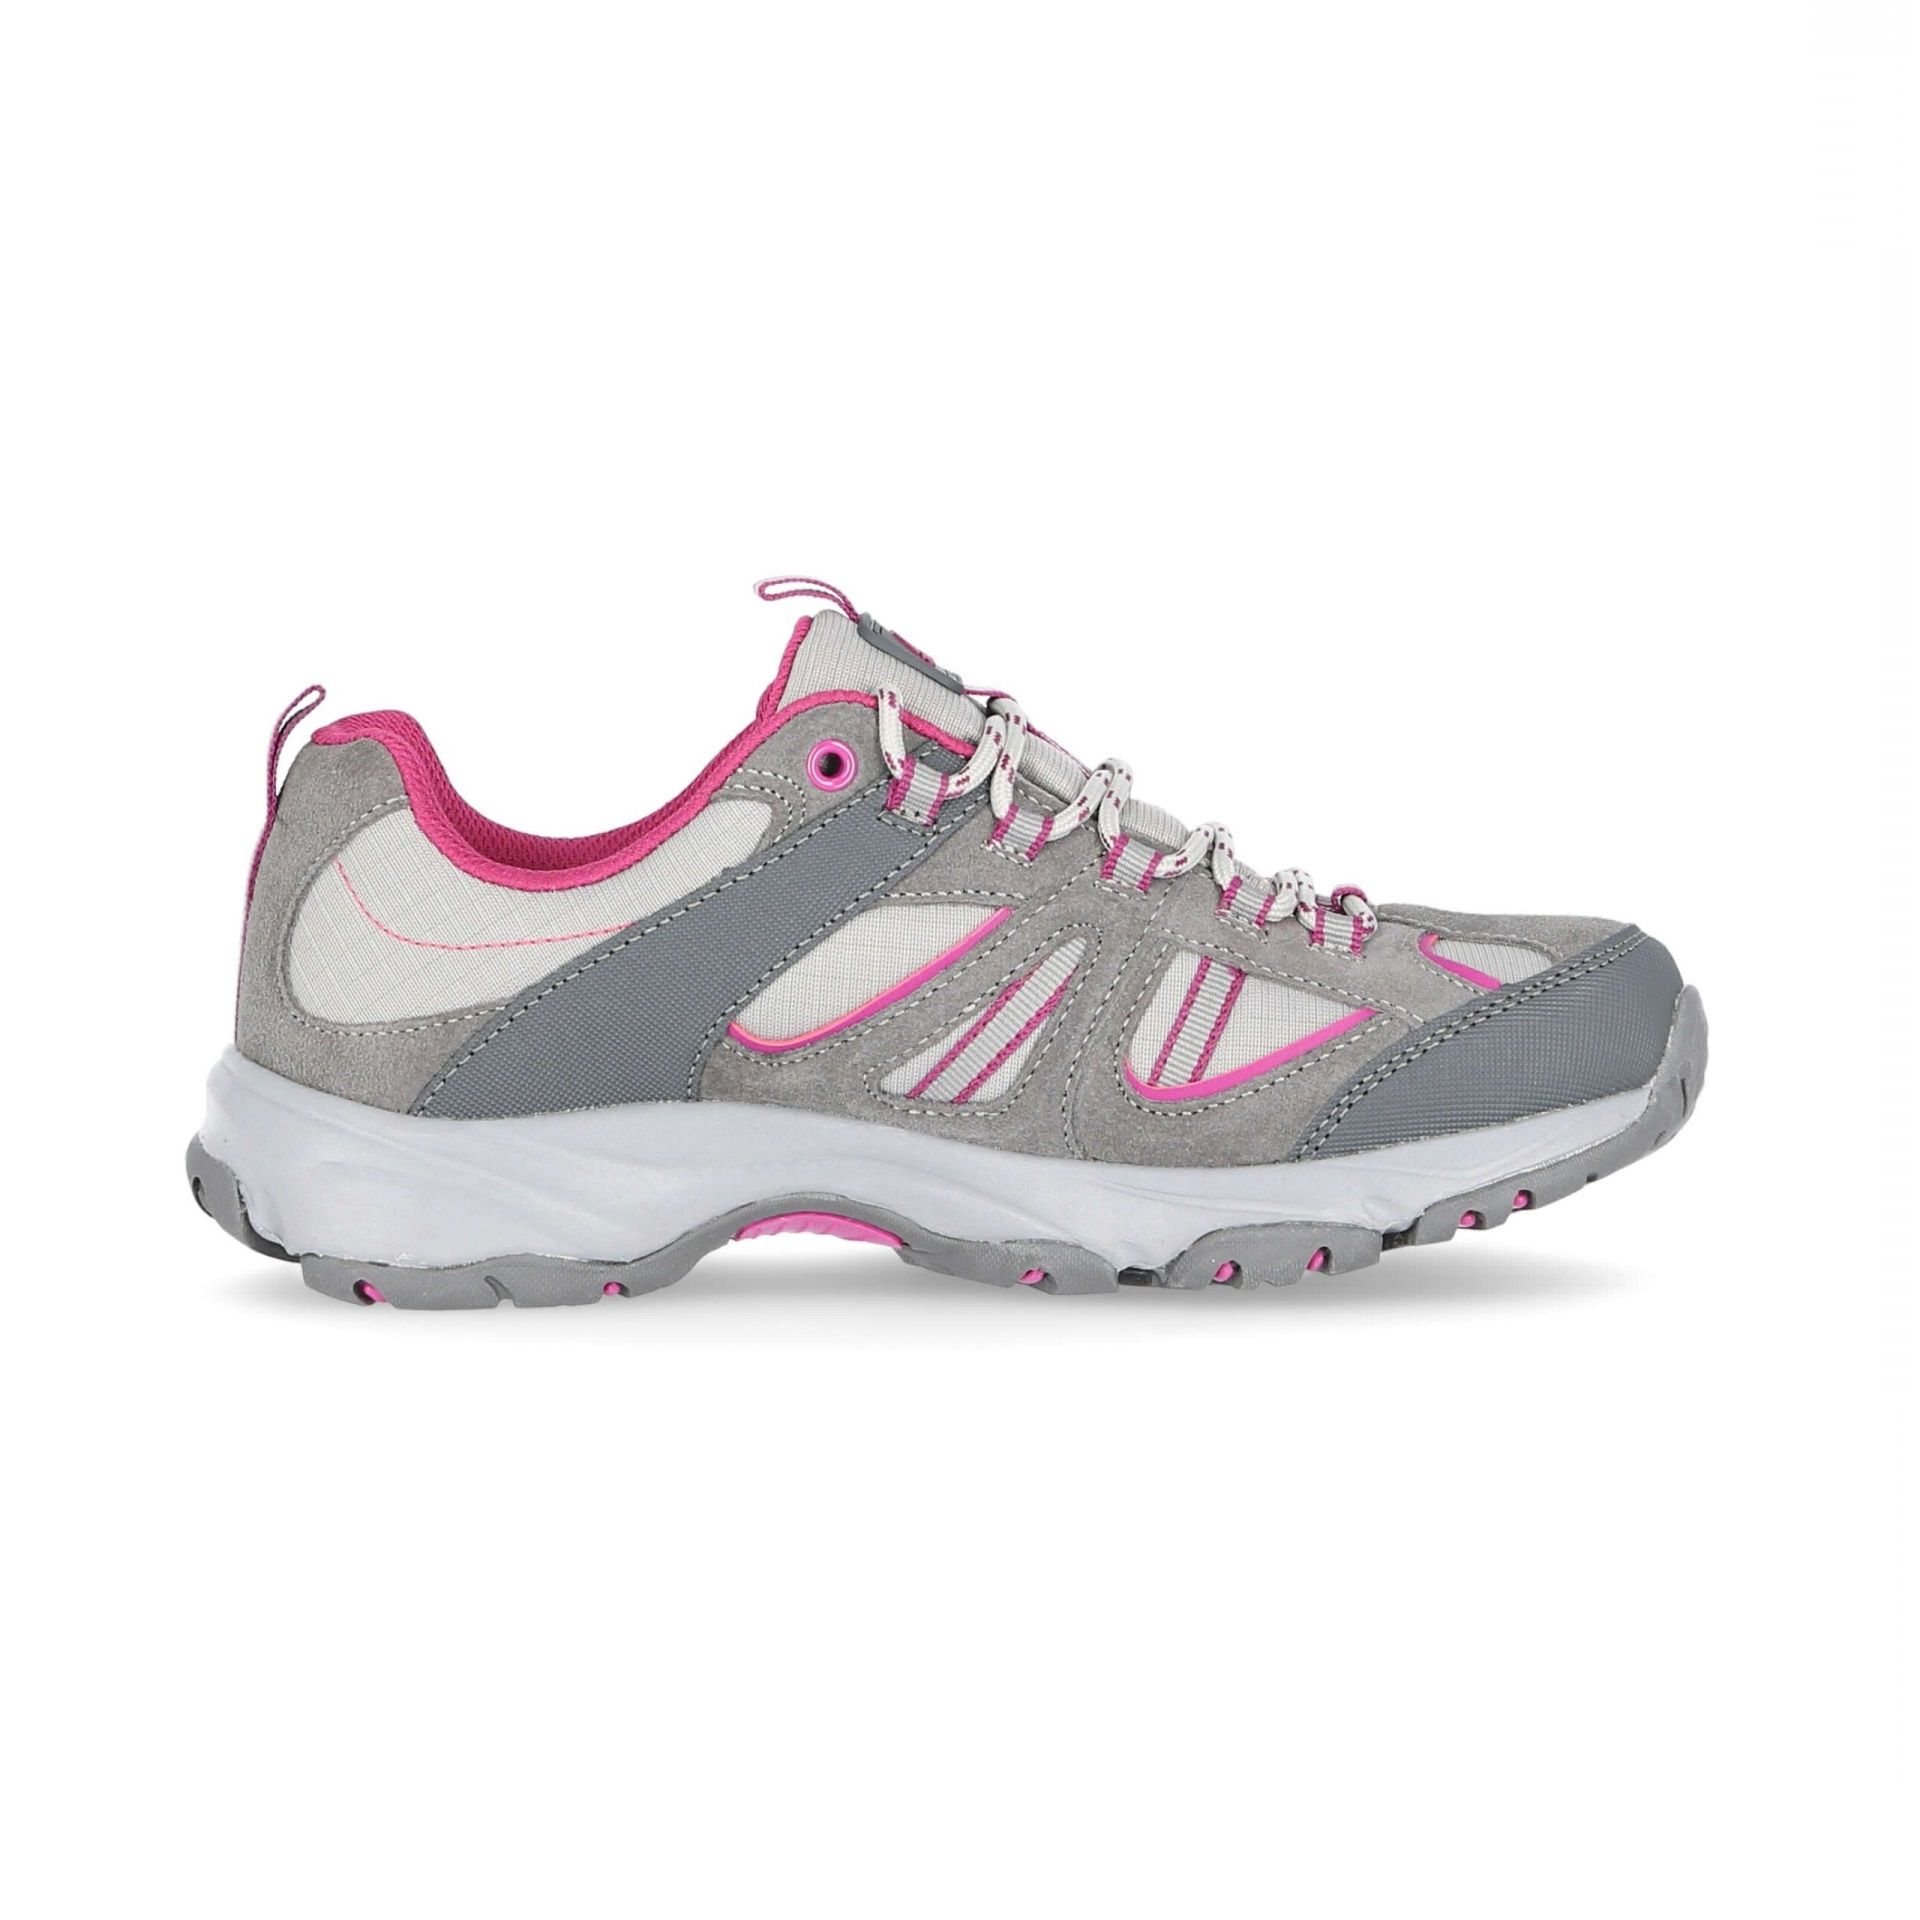 Ladies running trainers. Water resistant build. Speckled laces. Upper: 40% Suede/30% Mesh/30% PU, Midsole: 100% Phylon, Outsole: 100% TPR.